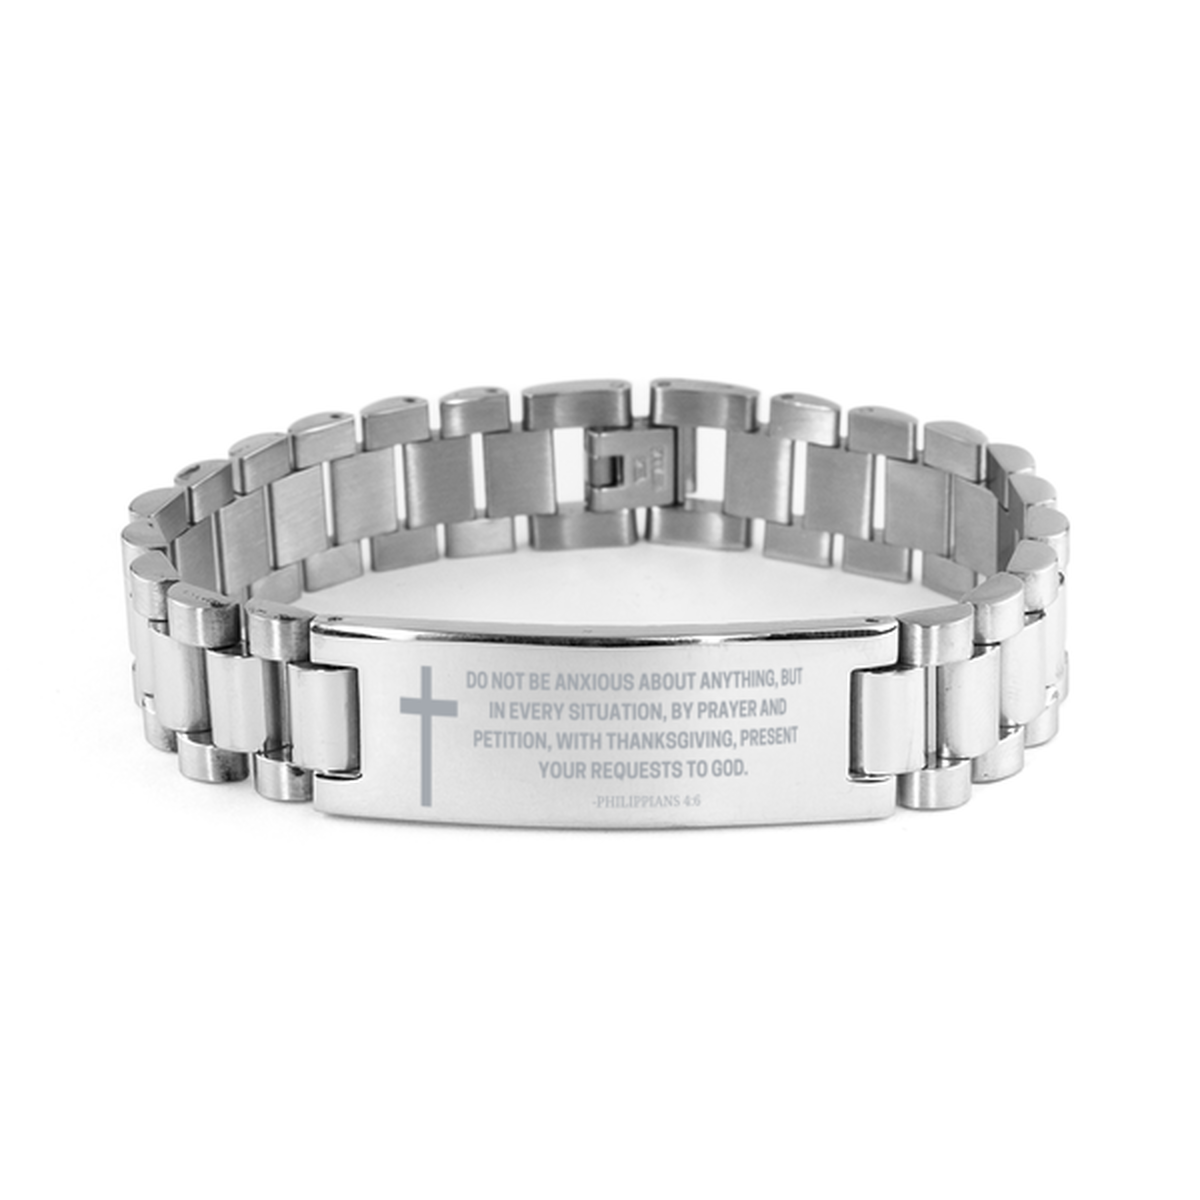 Baptism Gifts For Teenage Boys Girls, Christian Bible Verse Ladder Stainless Steel Bracelet, Do not be anxious about anything, Catholic Confirmation Gifts for Son, Godson, Grandson, Nephew